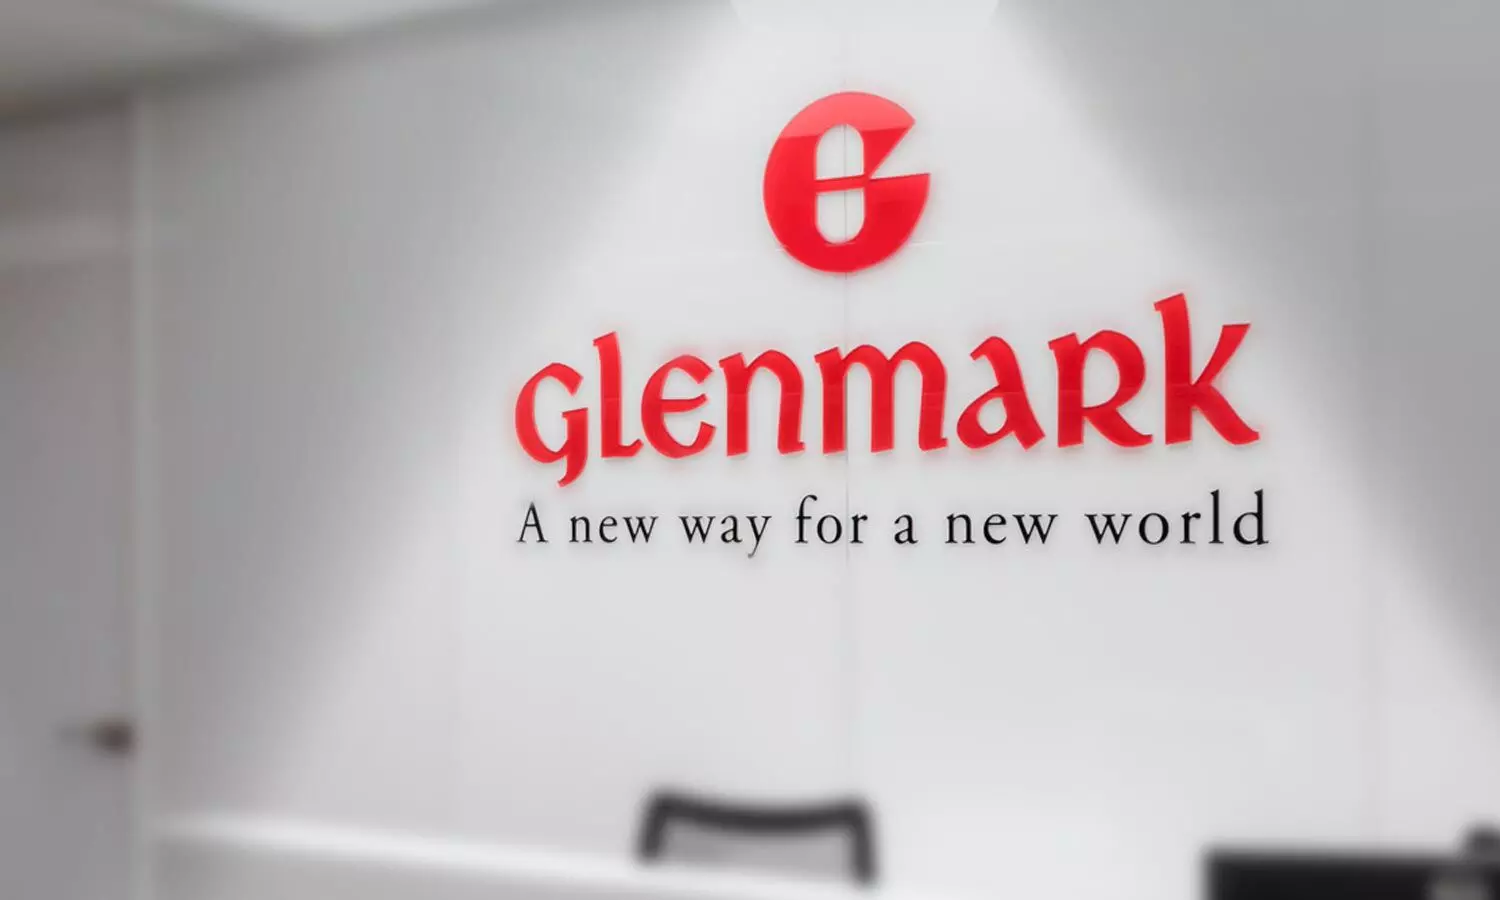 Fitch affirms Glenmark at BB on IPO of API business